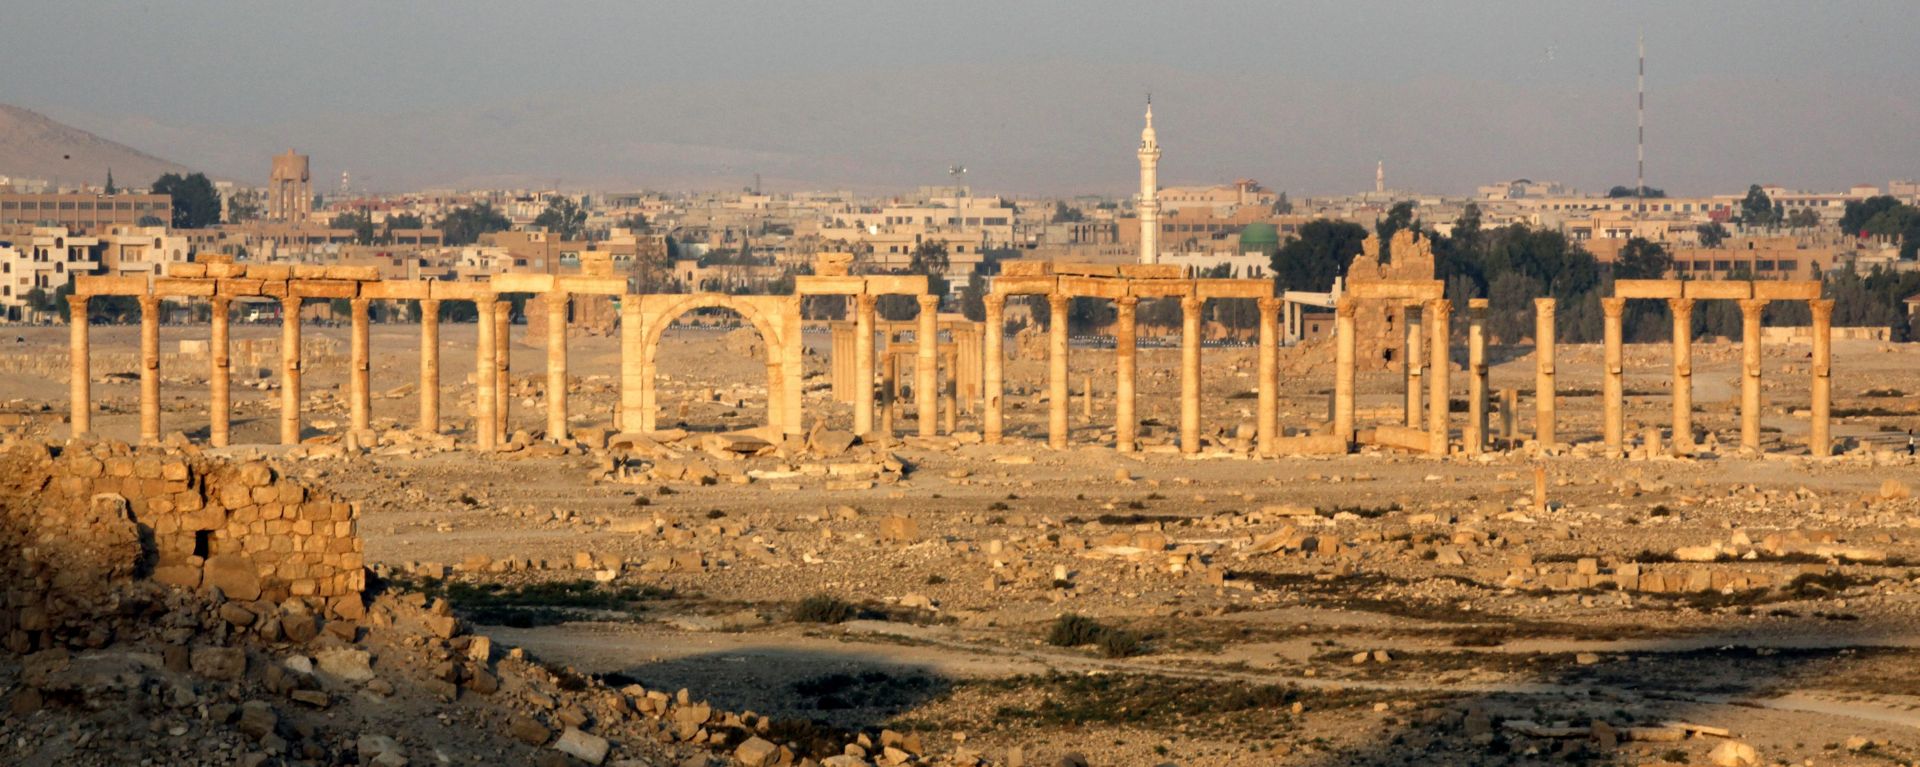 epa05228940 A photograph made available on 24 March 2016 showing the historical city of Palmyra, in central Syria, 12 November 2010. Official Syrian news sources on 24 March 2016 said government forces advanced to the vicinity of the ancient city of Palmyra (Tdmur), a UNESCO world Heritage site, in the central Homs province, that was captured by Islamic State (IS) militants in May 2015.  EPA/YOUSSEF BADAWI